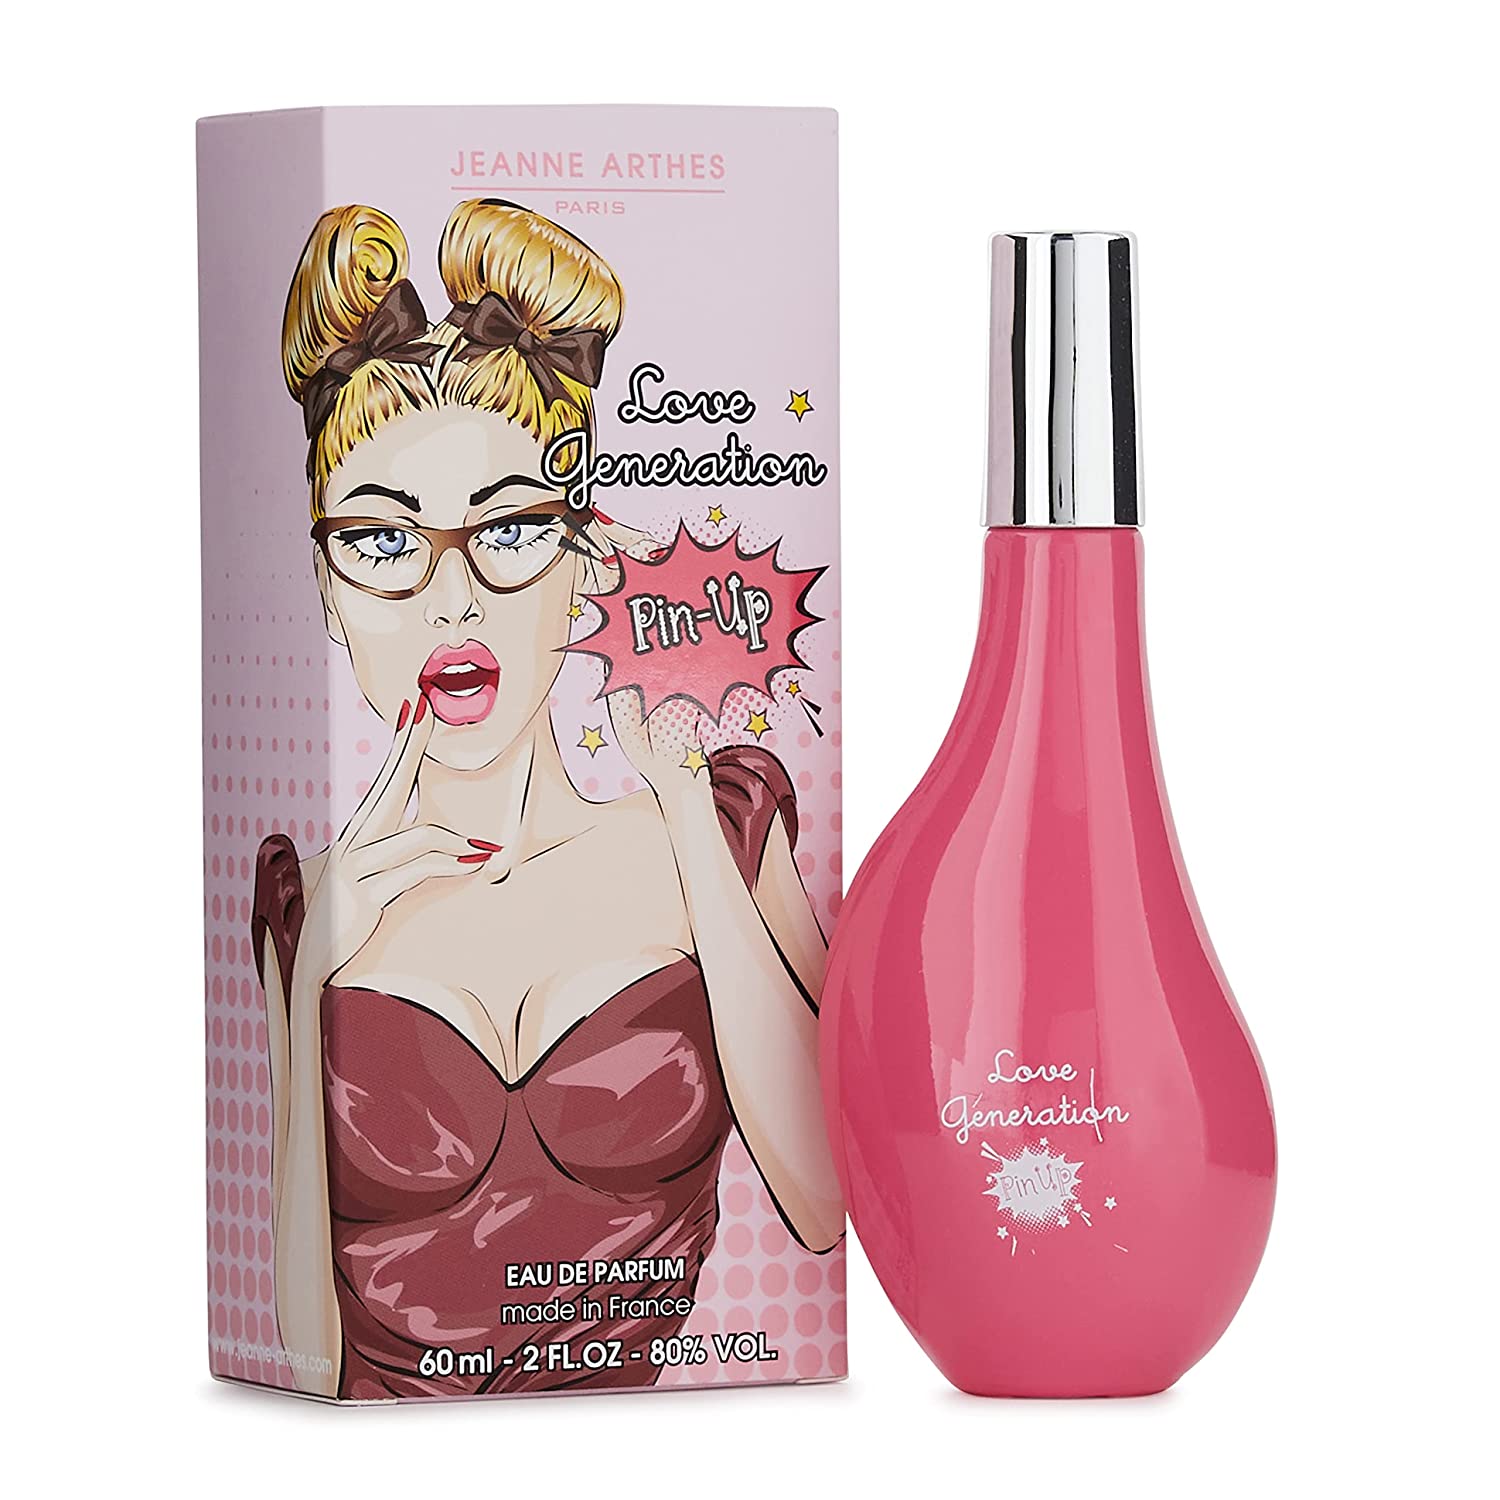 Jeanne Arthes LOVE GENERATION PIN UP EDP L